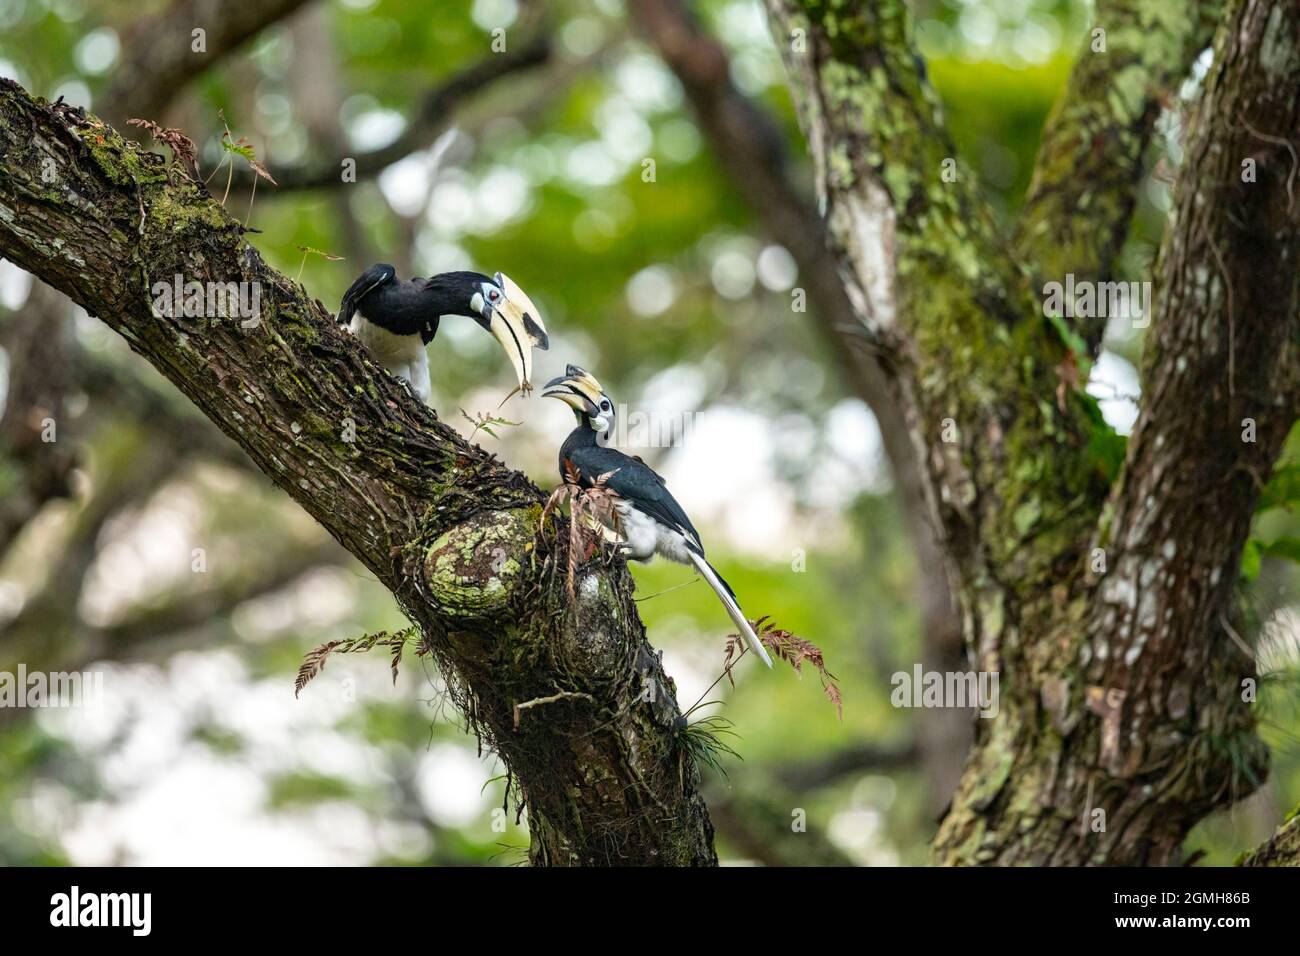 A pair of Oriental Pied Hornbill courtship feeding with a gecko in a tree at a park, Singapore Stock Photo